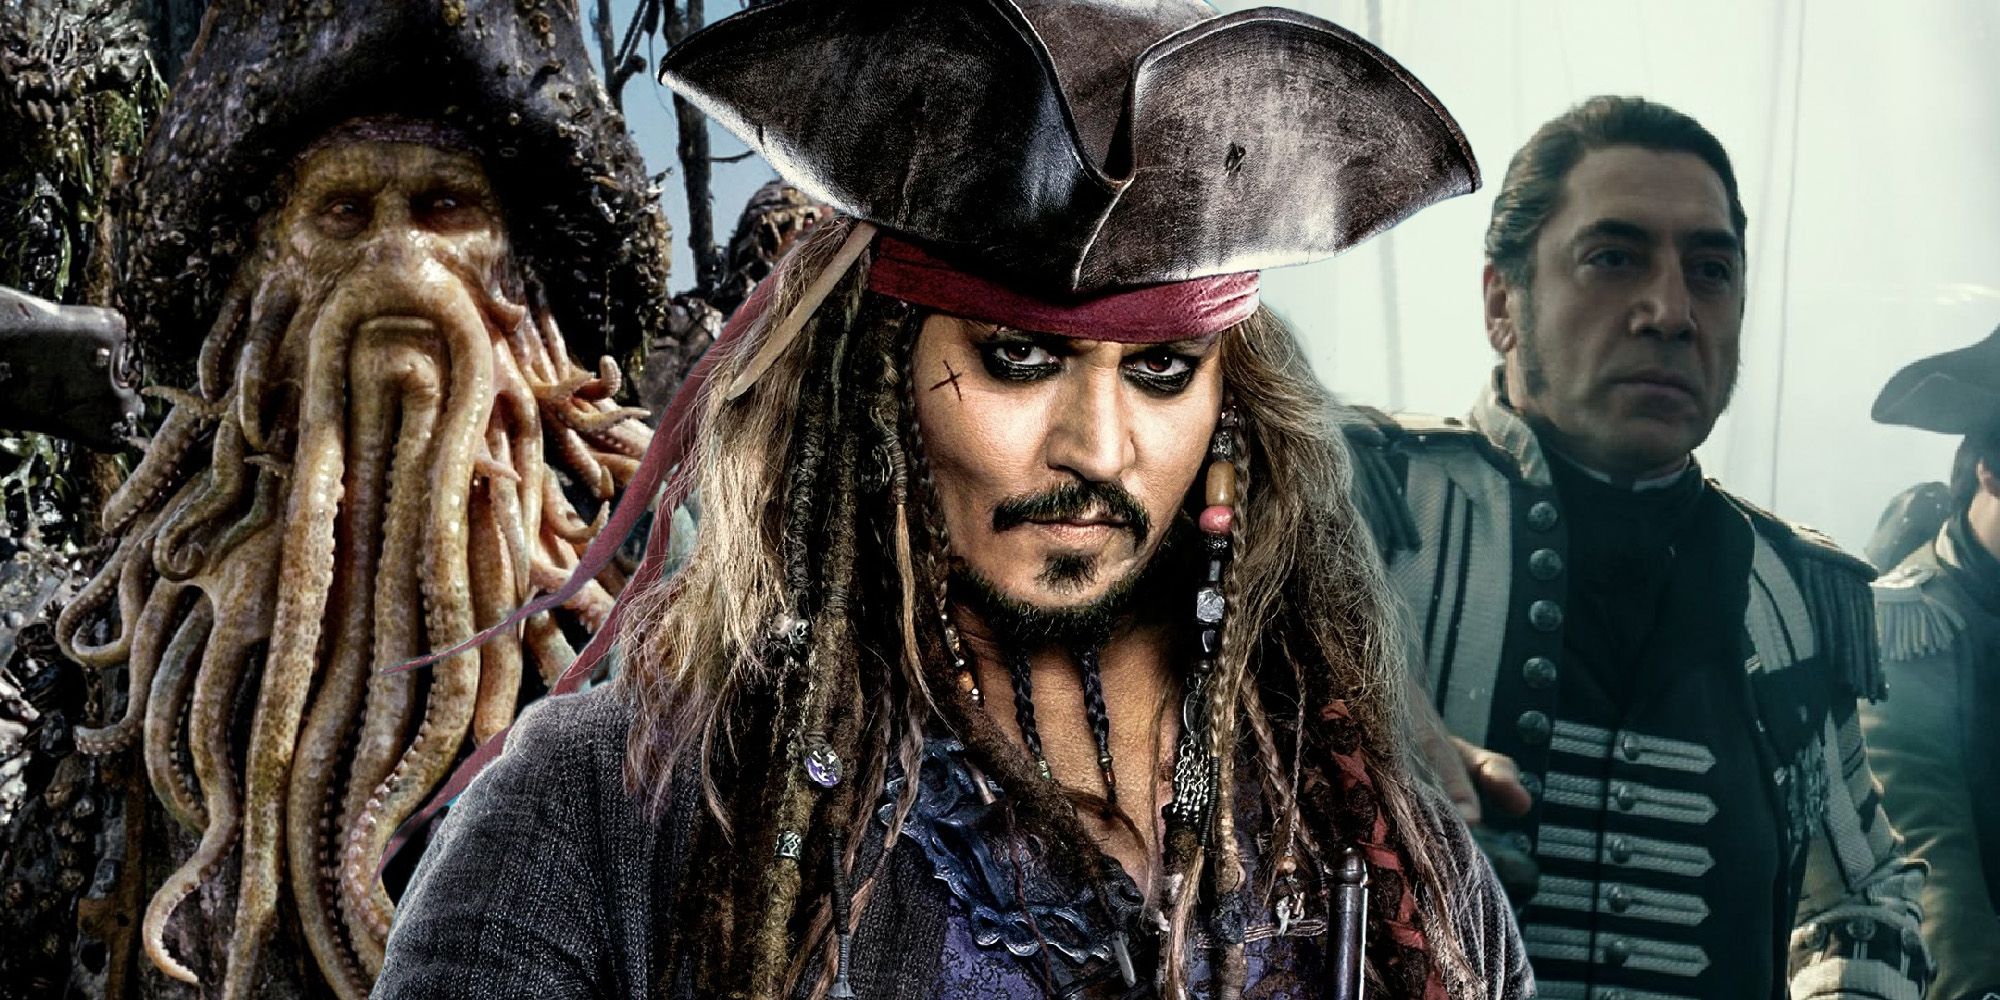 5 Reasons Why Pirates Of The Caribbean & Johnny Depp Are Better Apart